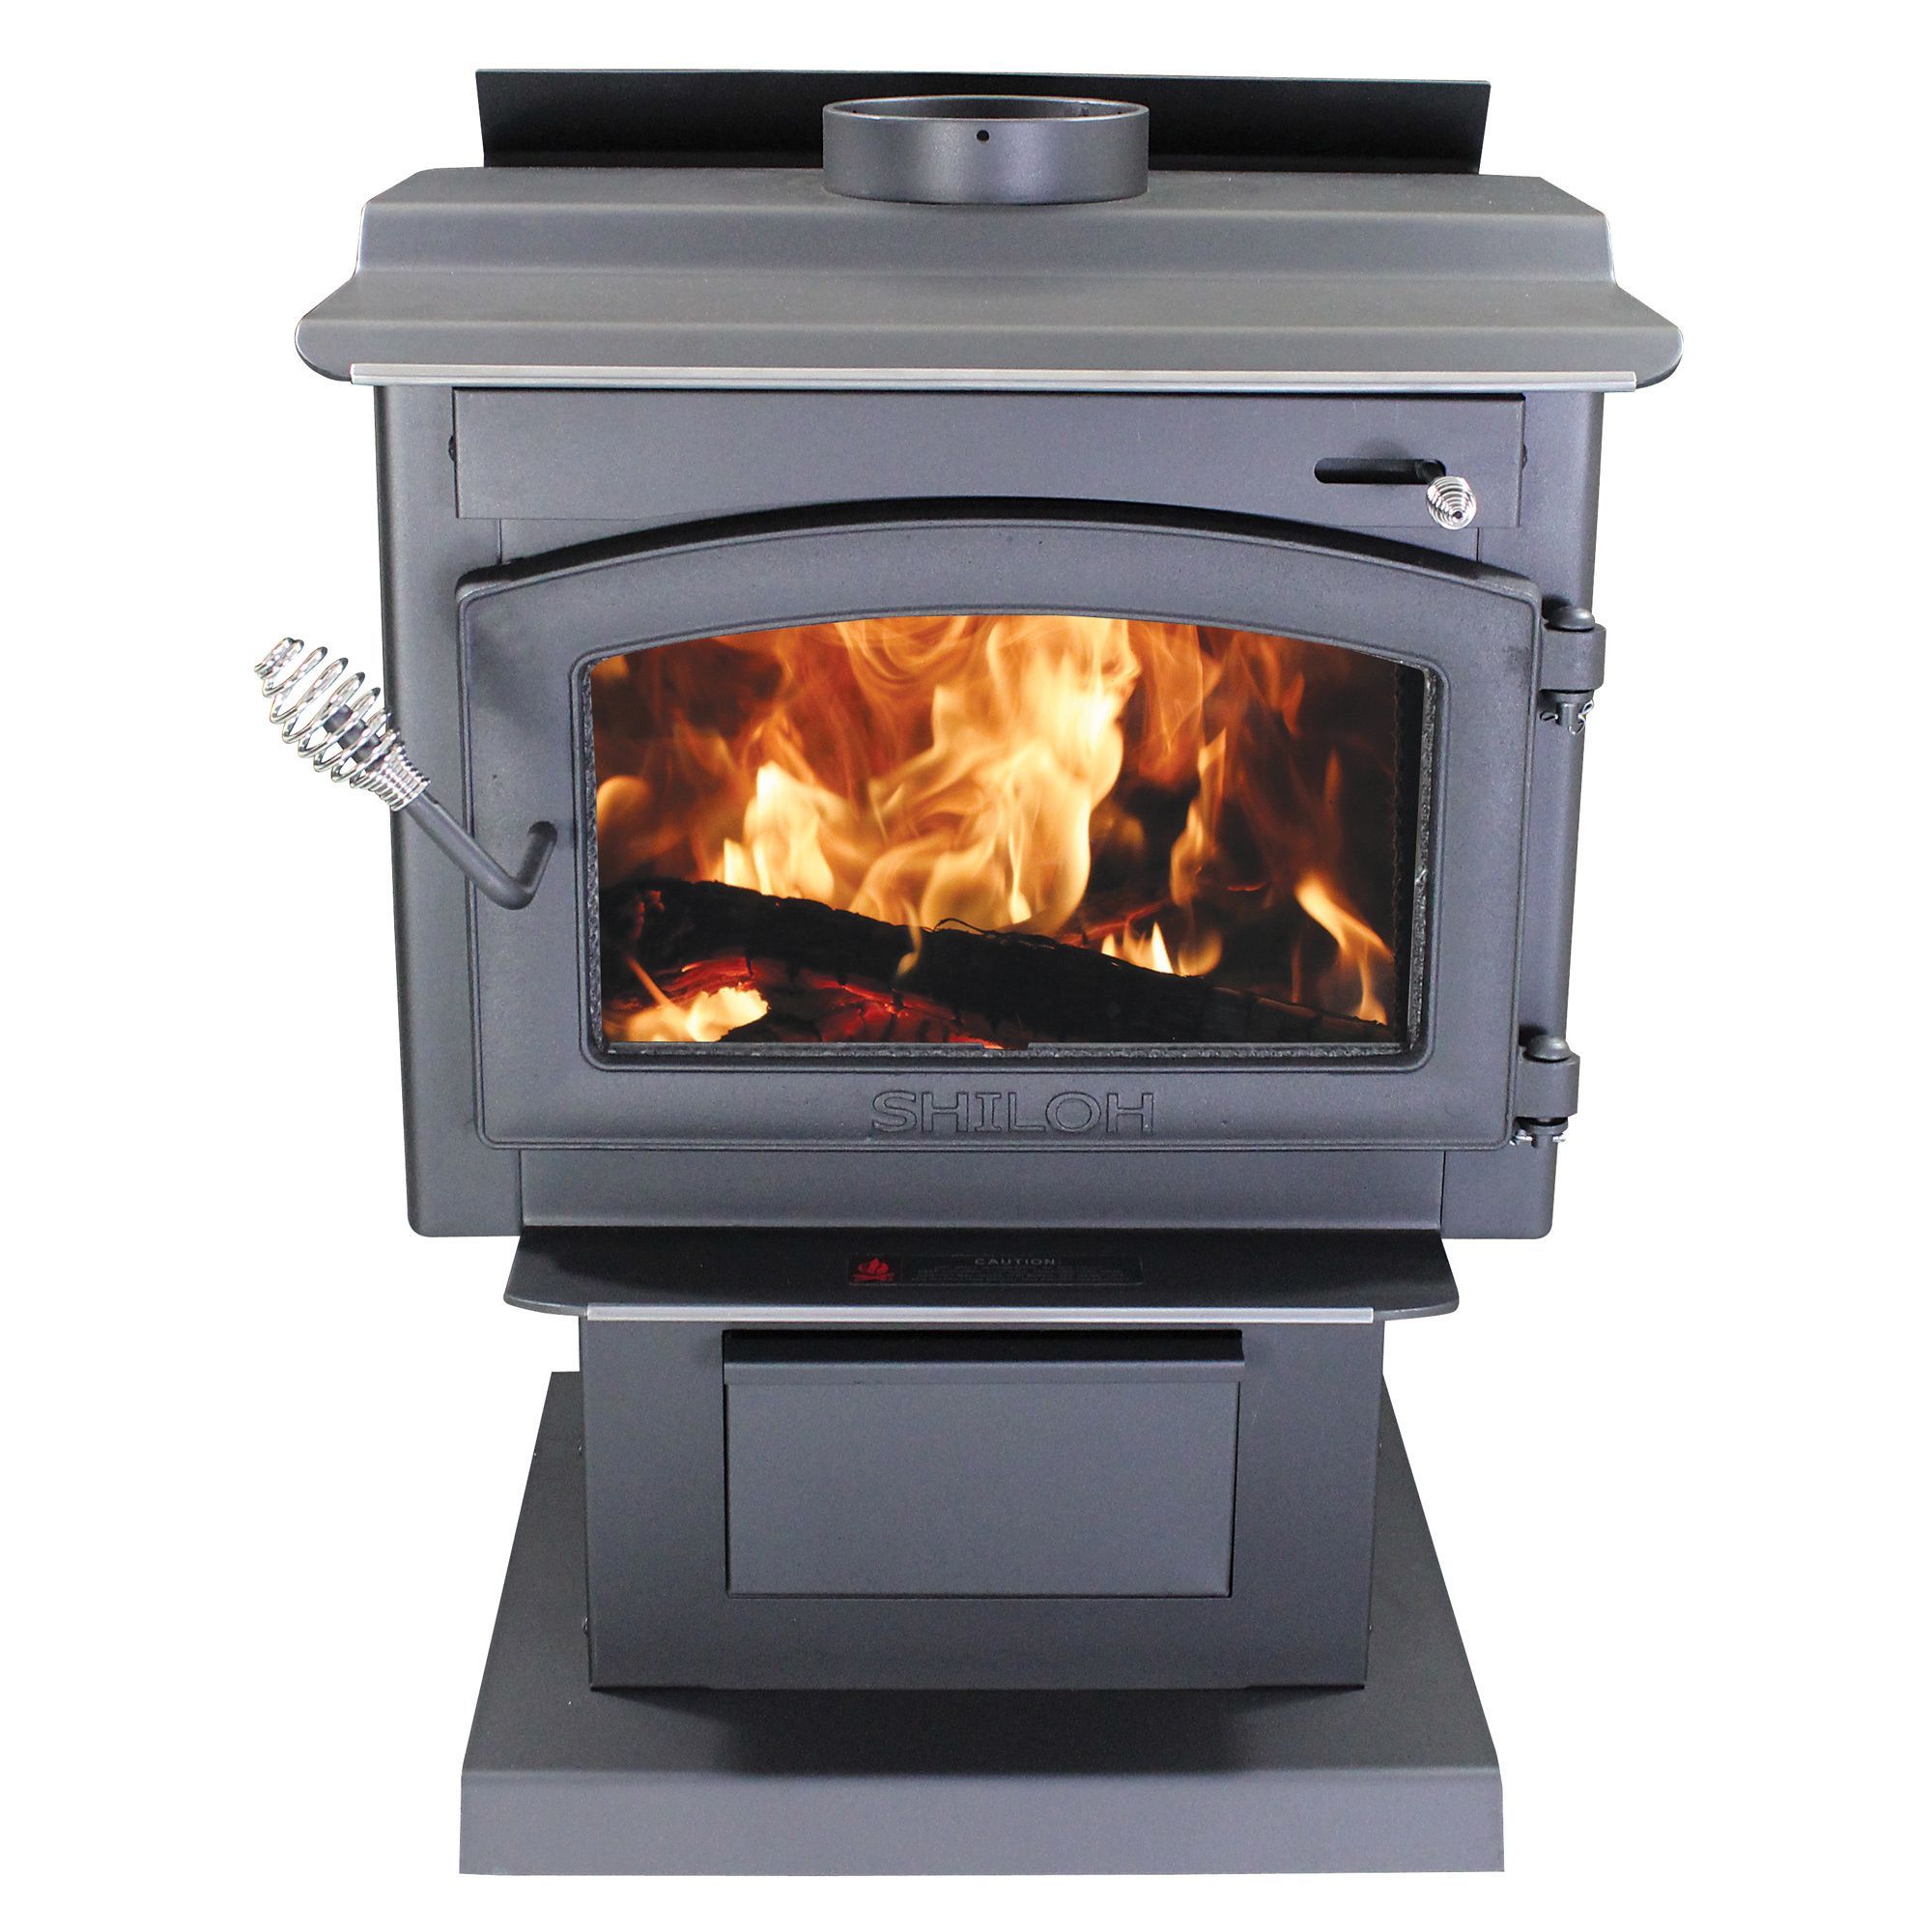 Cast Iron Wood Burning Fireplace Luxury This High Efficiency Wood Stove is An Air Tight Plate Steel